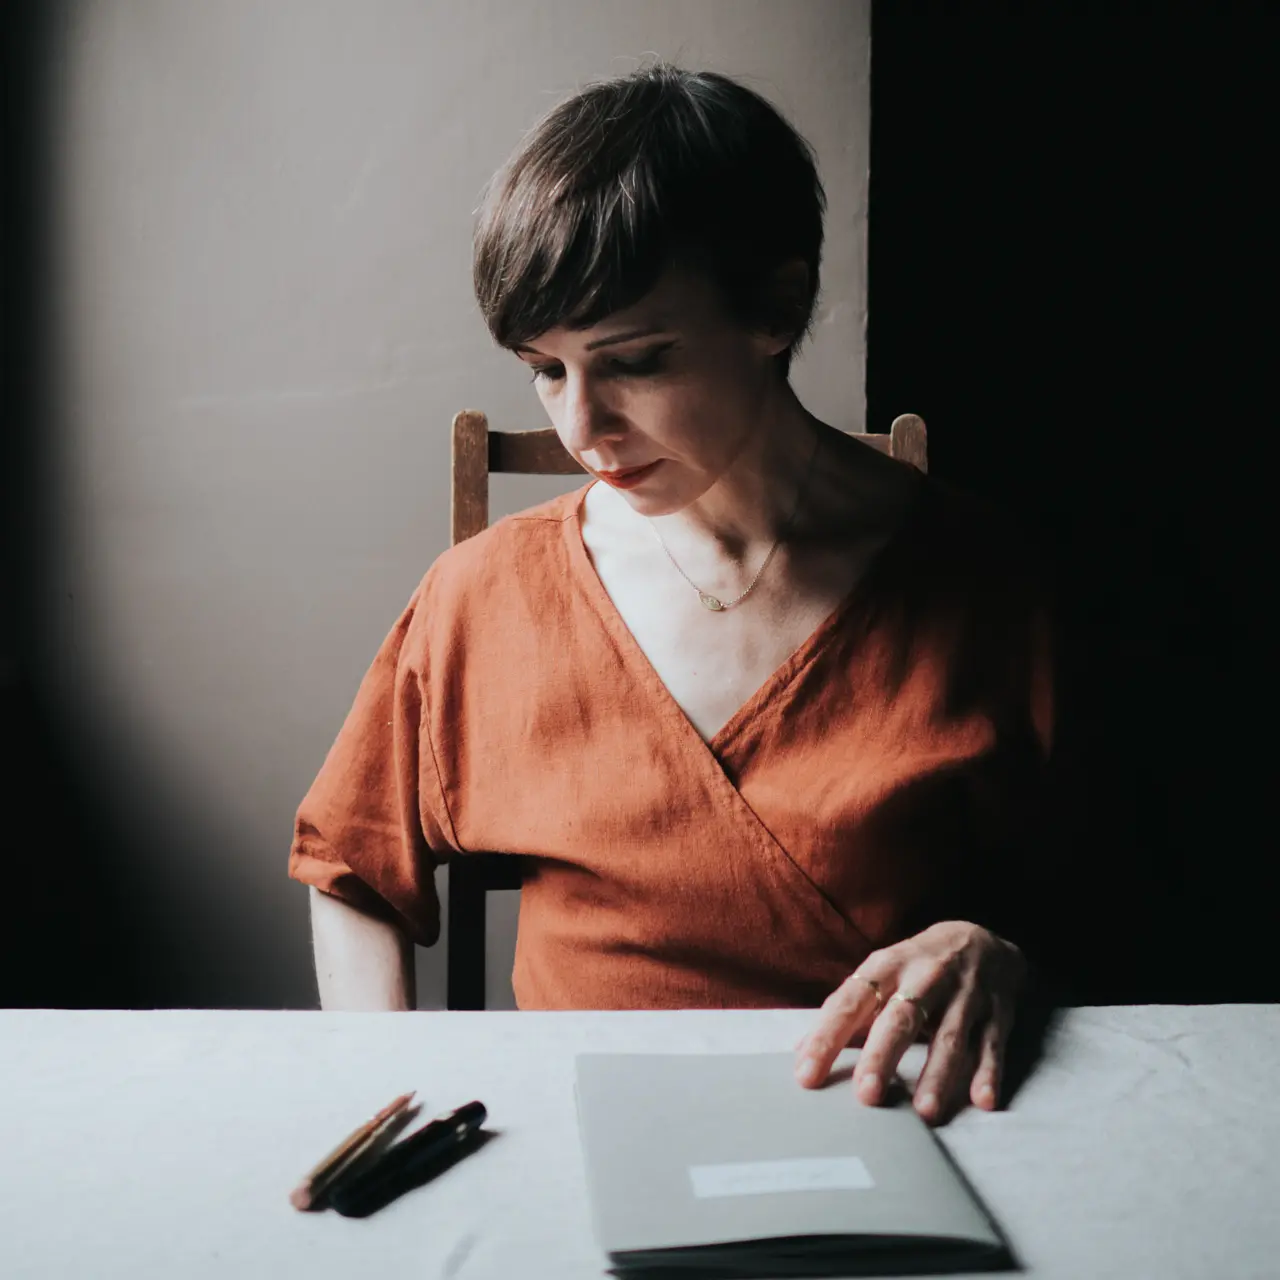 Gaelle Jolly sitting at a table with a notebook and pens in front of her